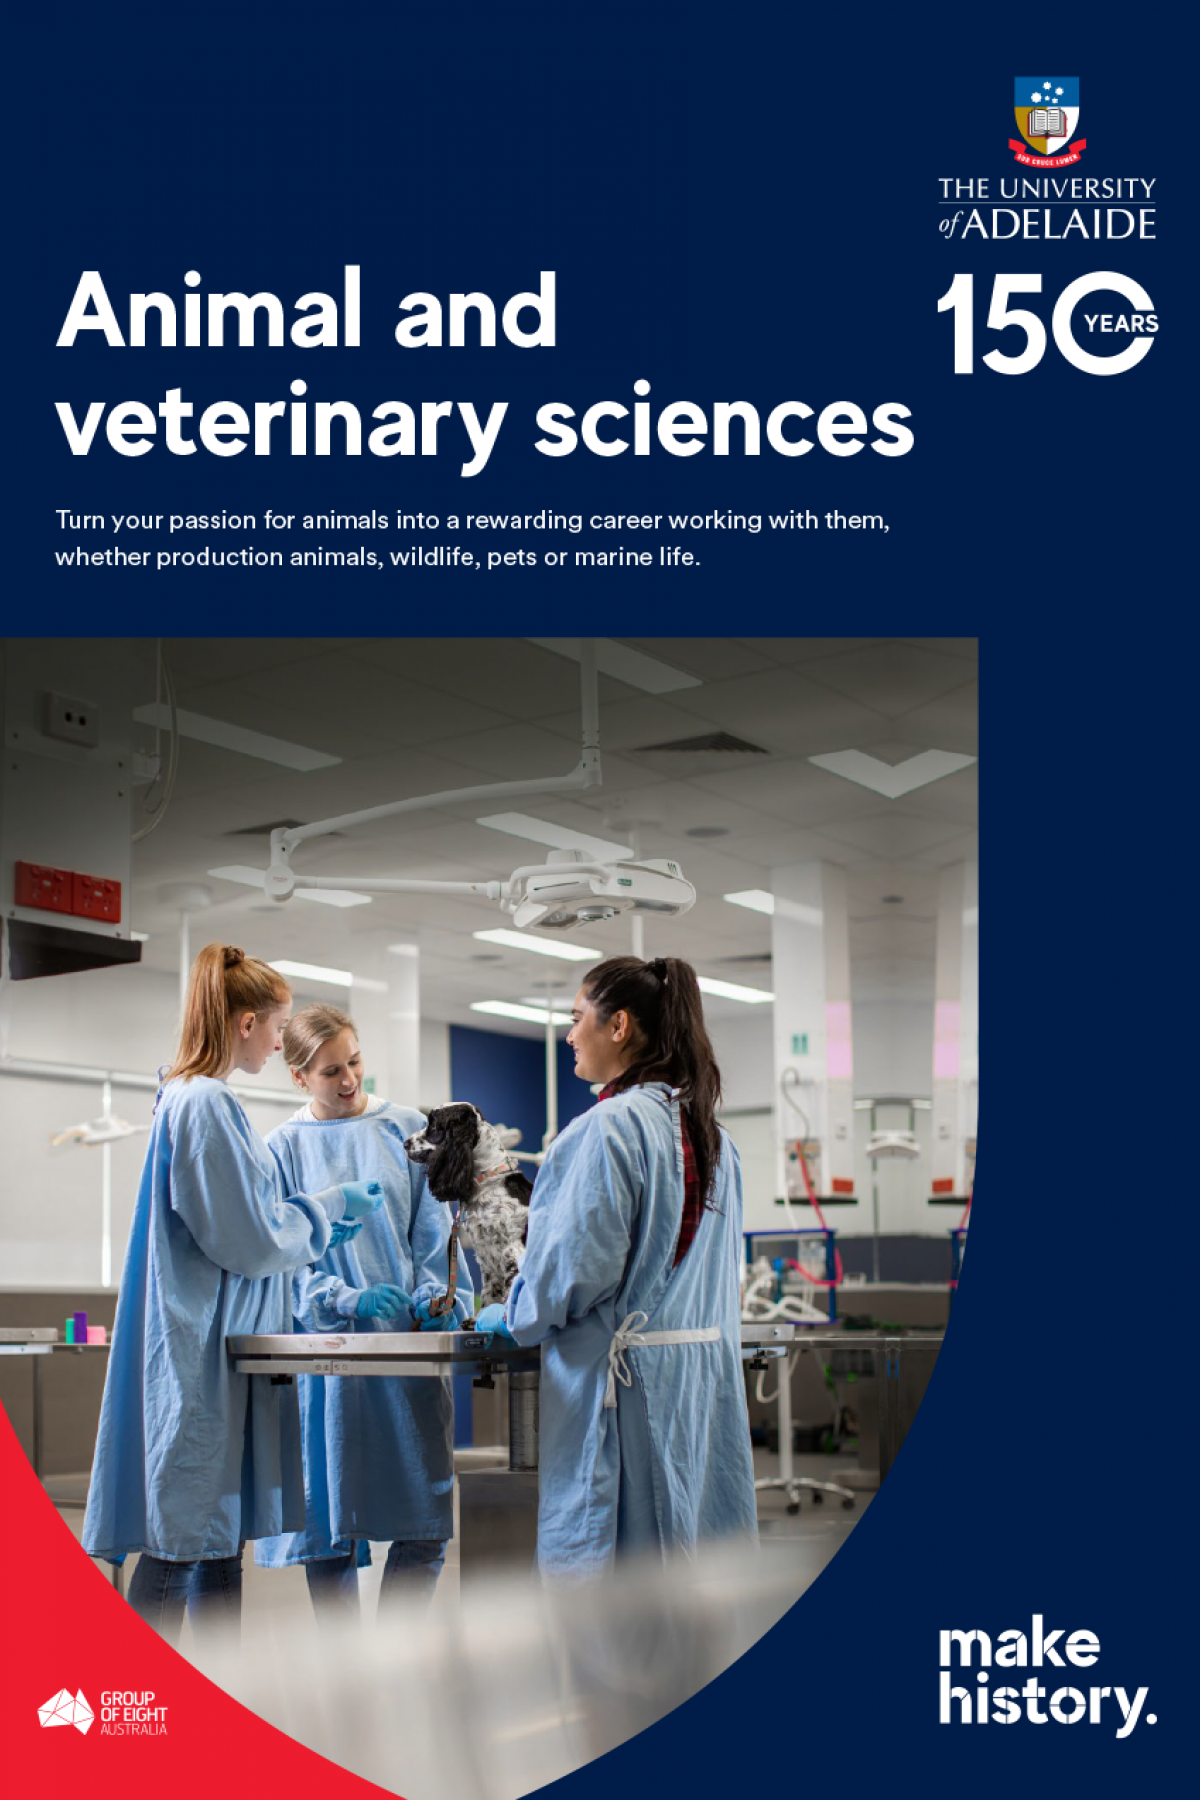 Animal and Veterinary Sciences flyer